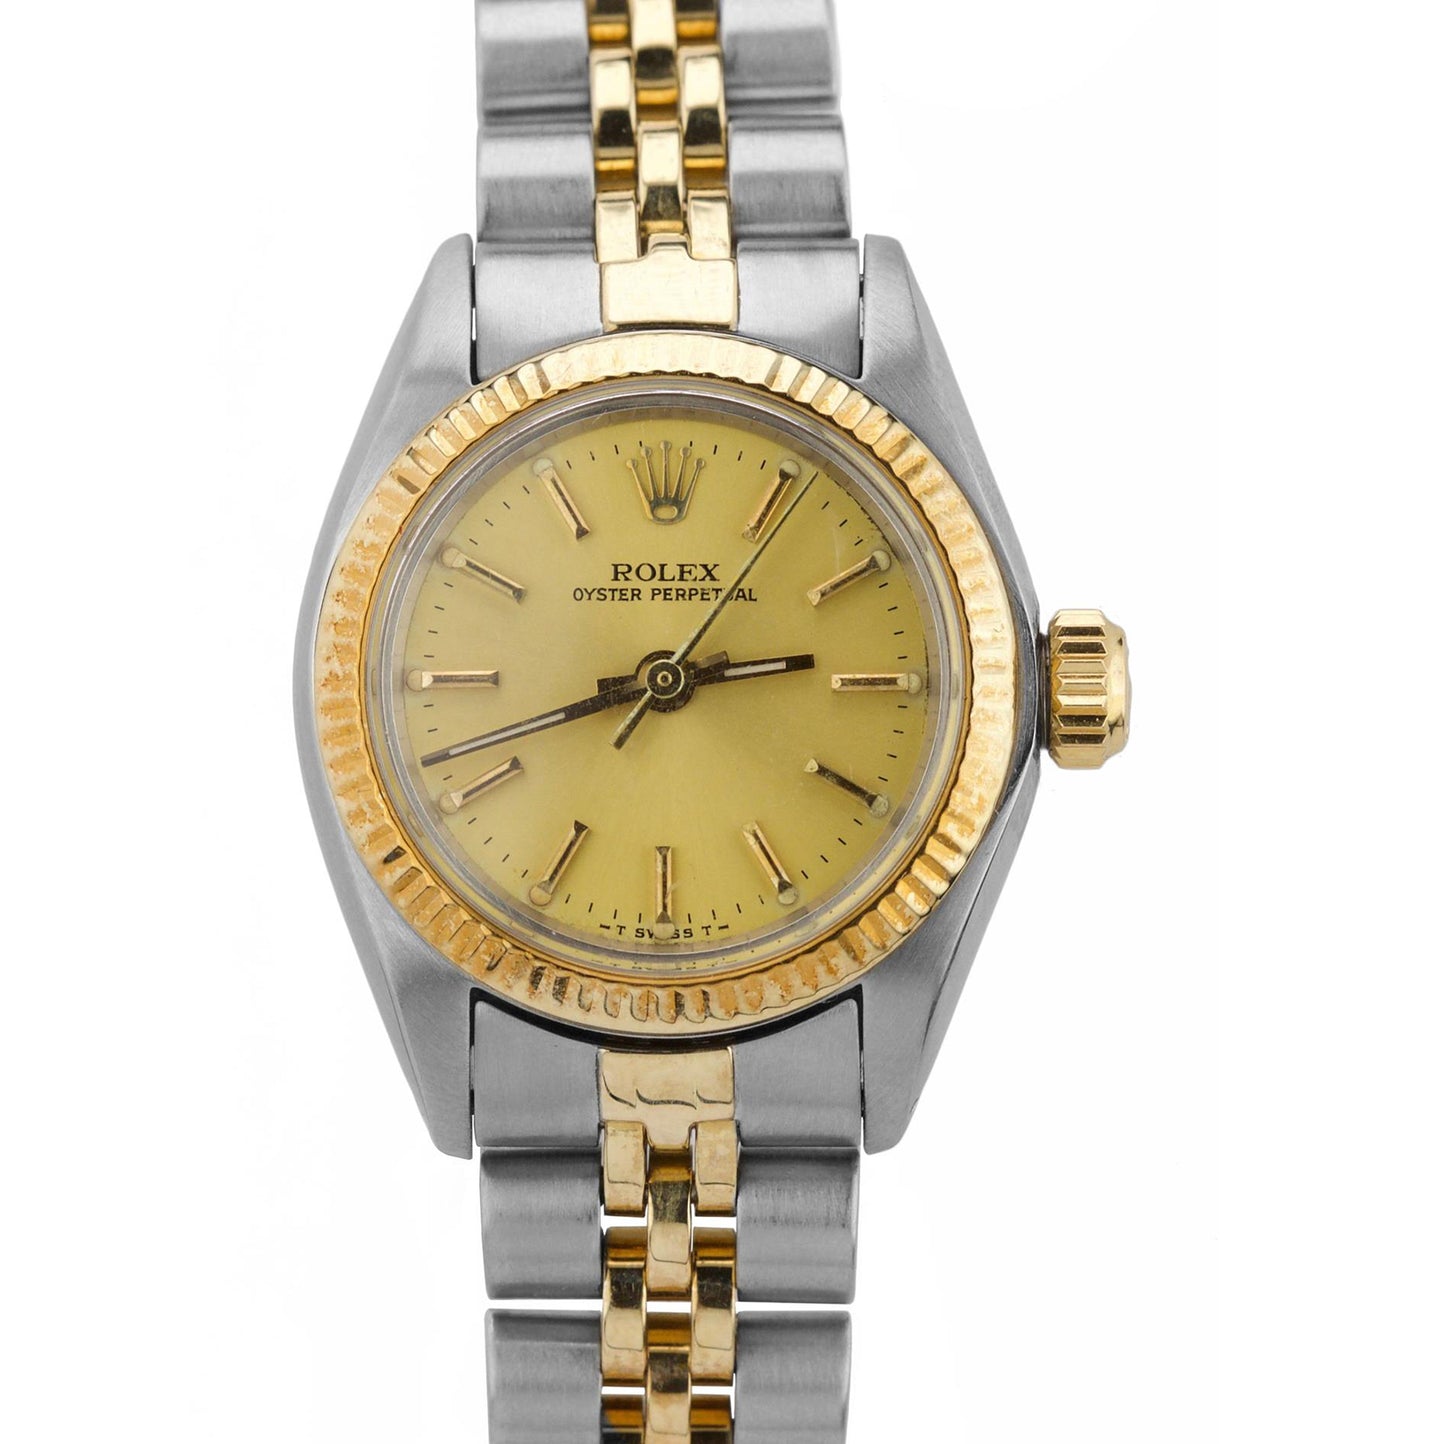 Rolex Oyster Perpetual 24mm Two-Tone Yellow Gold CHAMPAGNE Jubilee Watch 6719